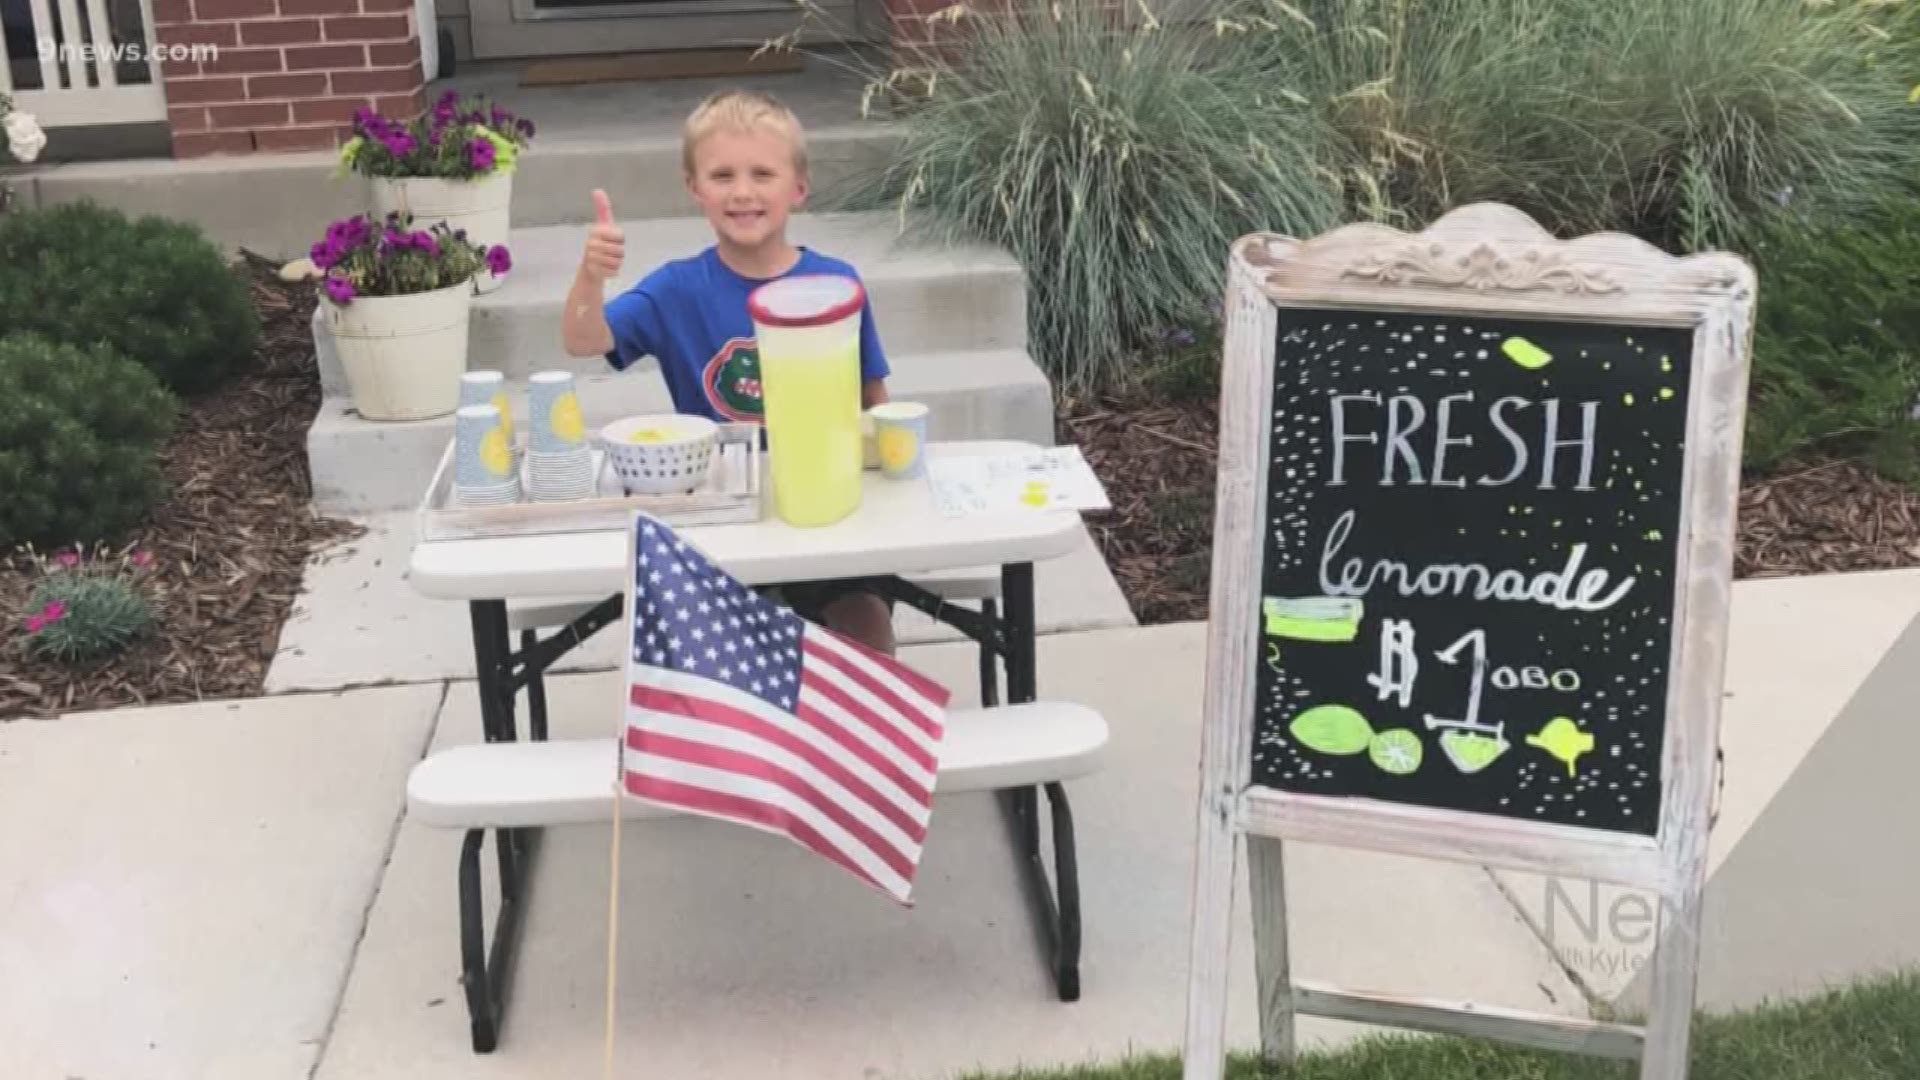 A boy in Stapleton set up a lemonade stand Monday. Looked like any other - the table - the sign - the pitcher of lemonade. It wasn't until you stopped to talk that you learned this was an incredible act of courage. And it brought out the best in the community.